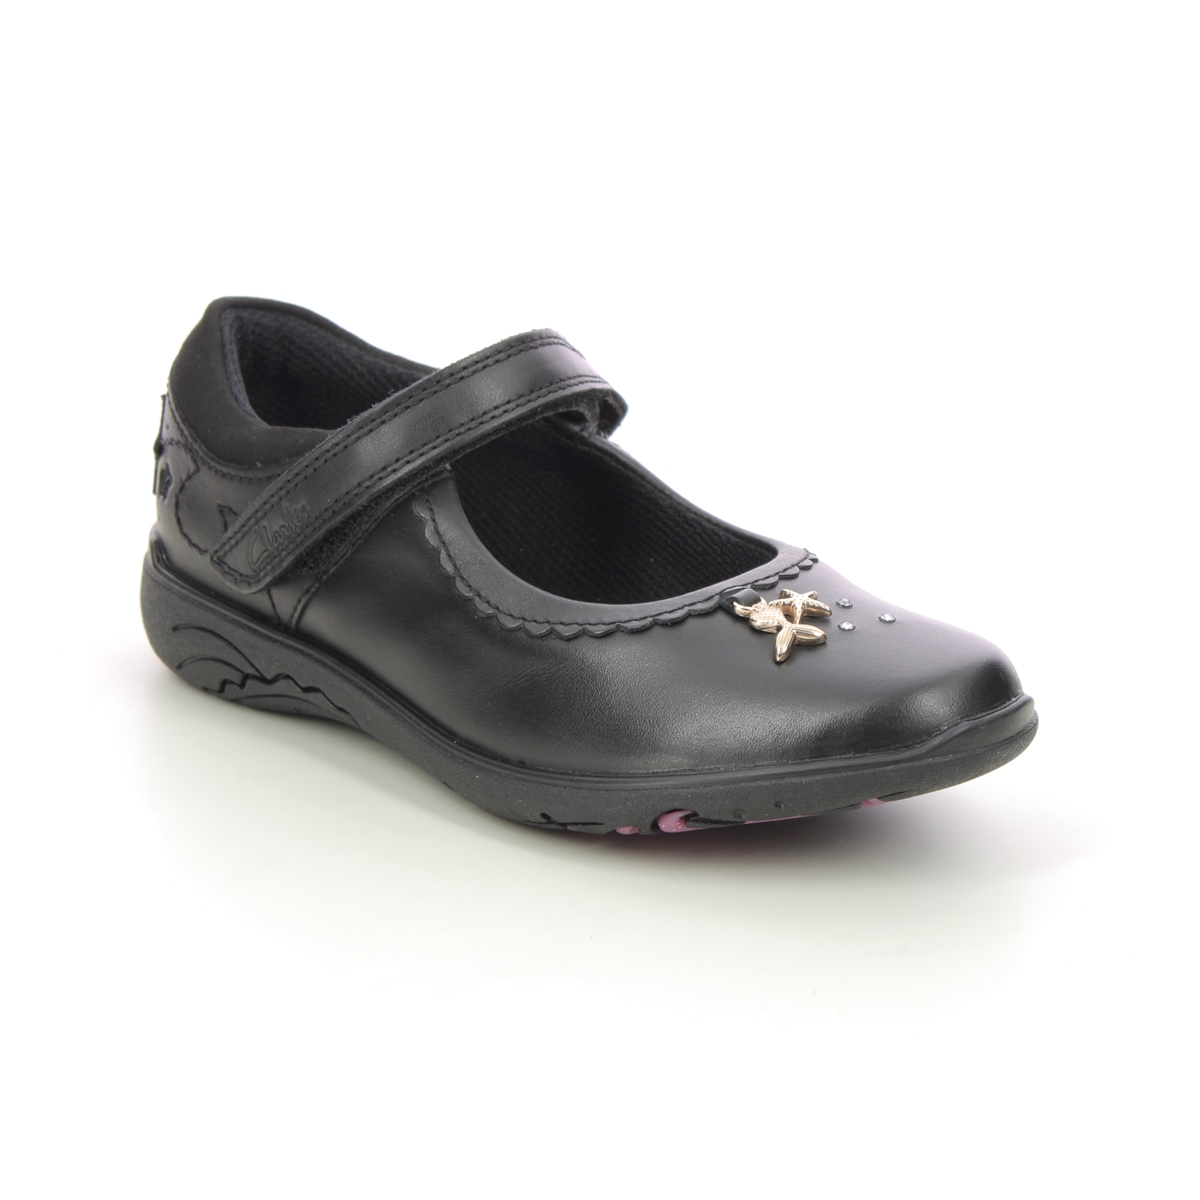 Clarks Relda Sea K Mary Jane Black Leather Kids Girls School Shoes 722405E In Size 13 In Plain Black Leather E Width Fitting Narrow Fit For School For